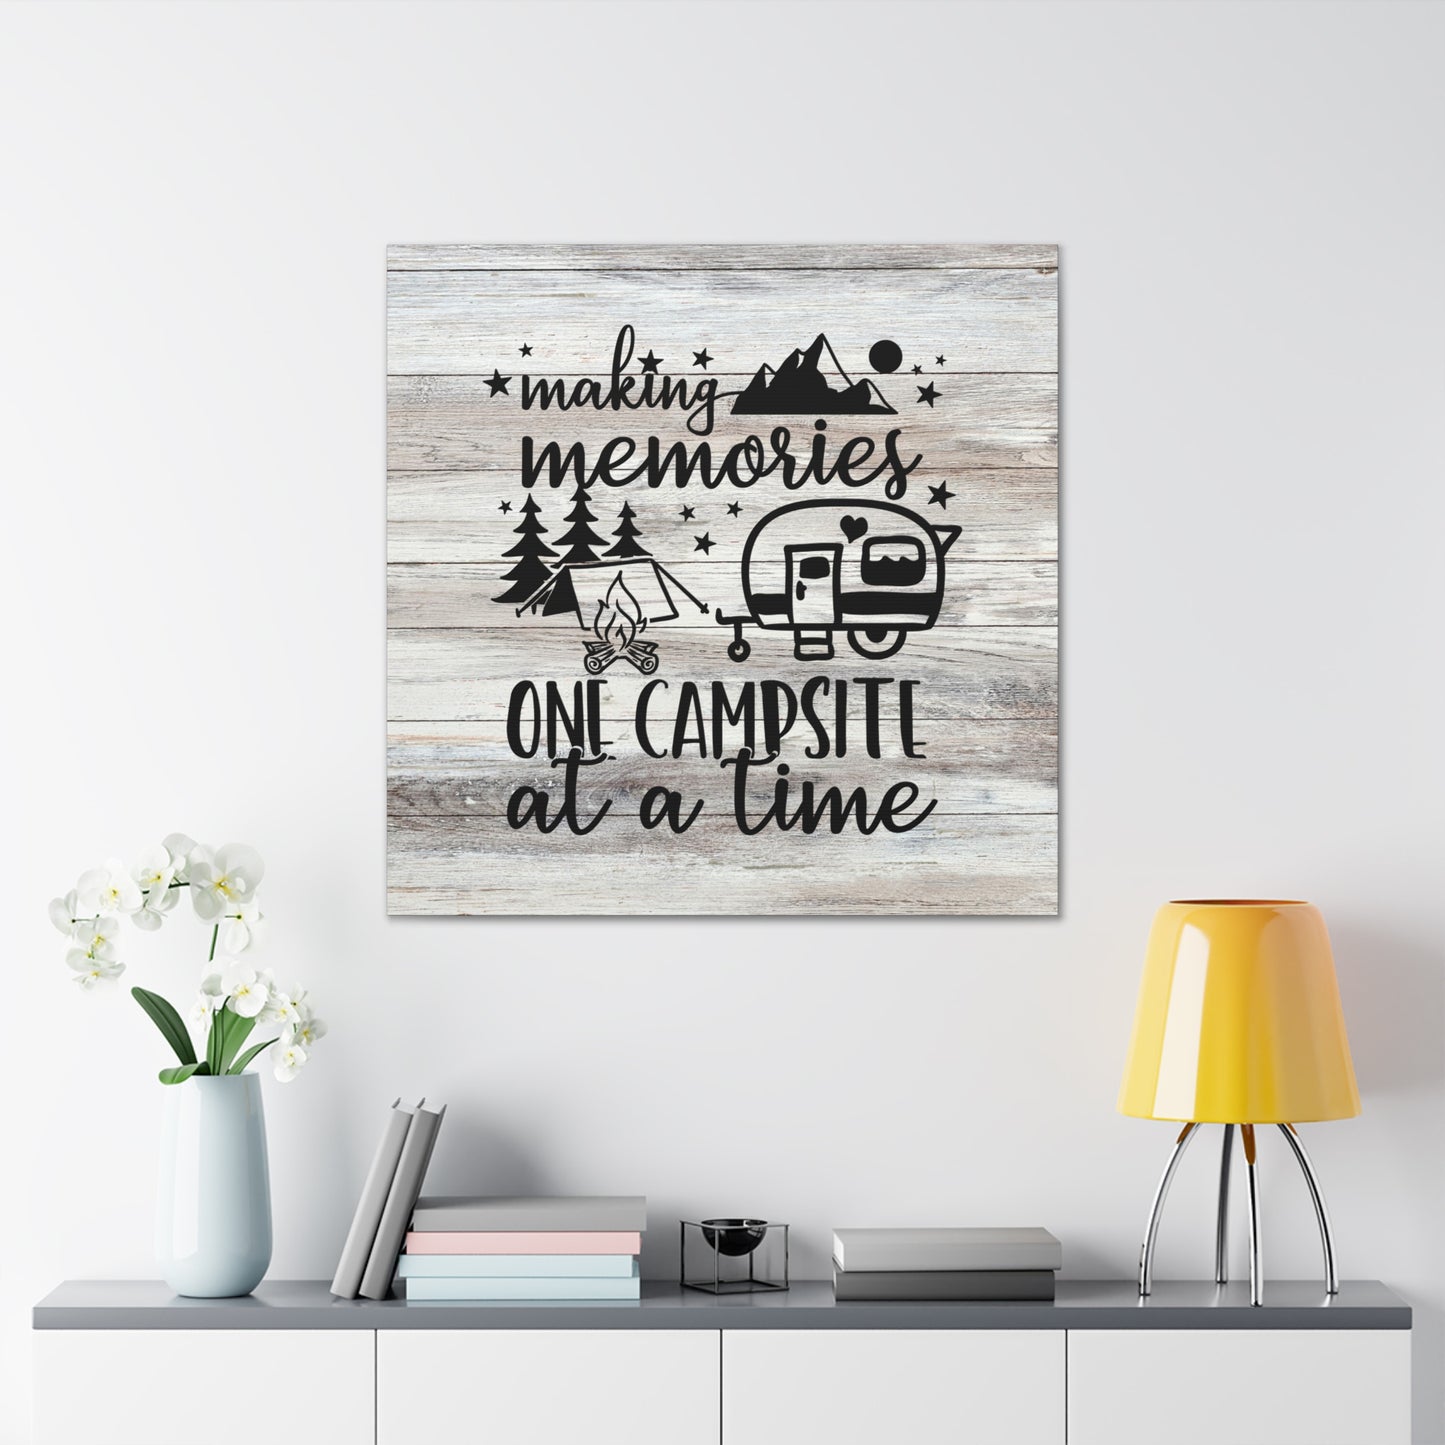 "Making Memories One Campsite At A Time" Wall Art - Weave Got Gifts - Unique Gifts You Won’t Find Anywhere Else!